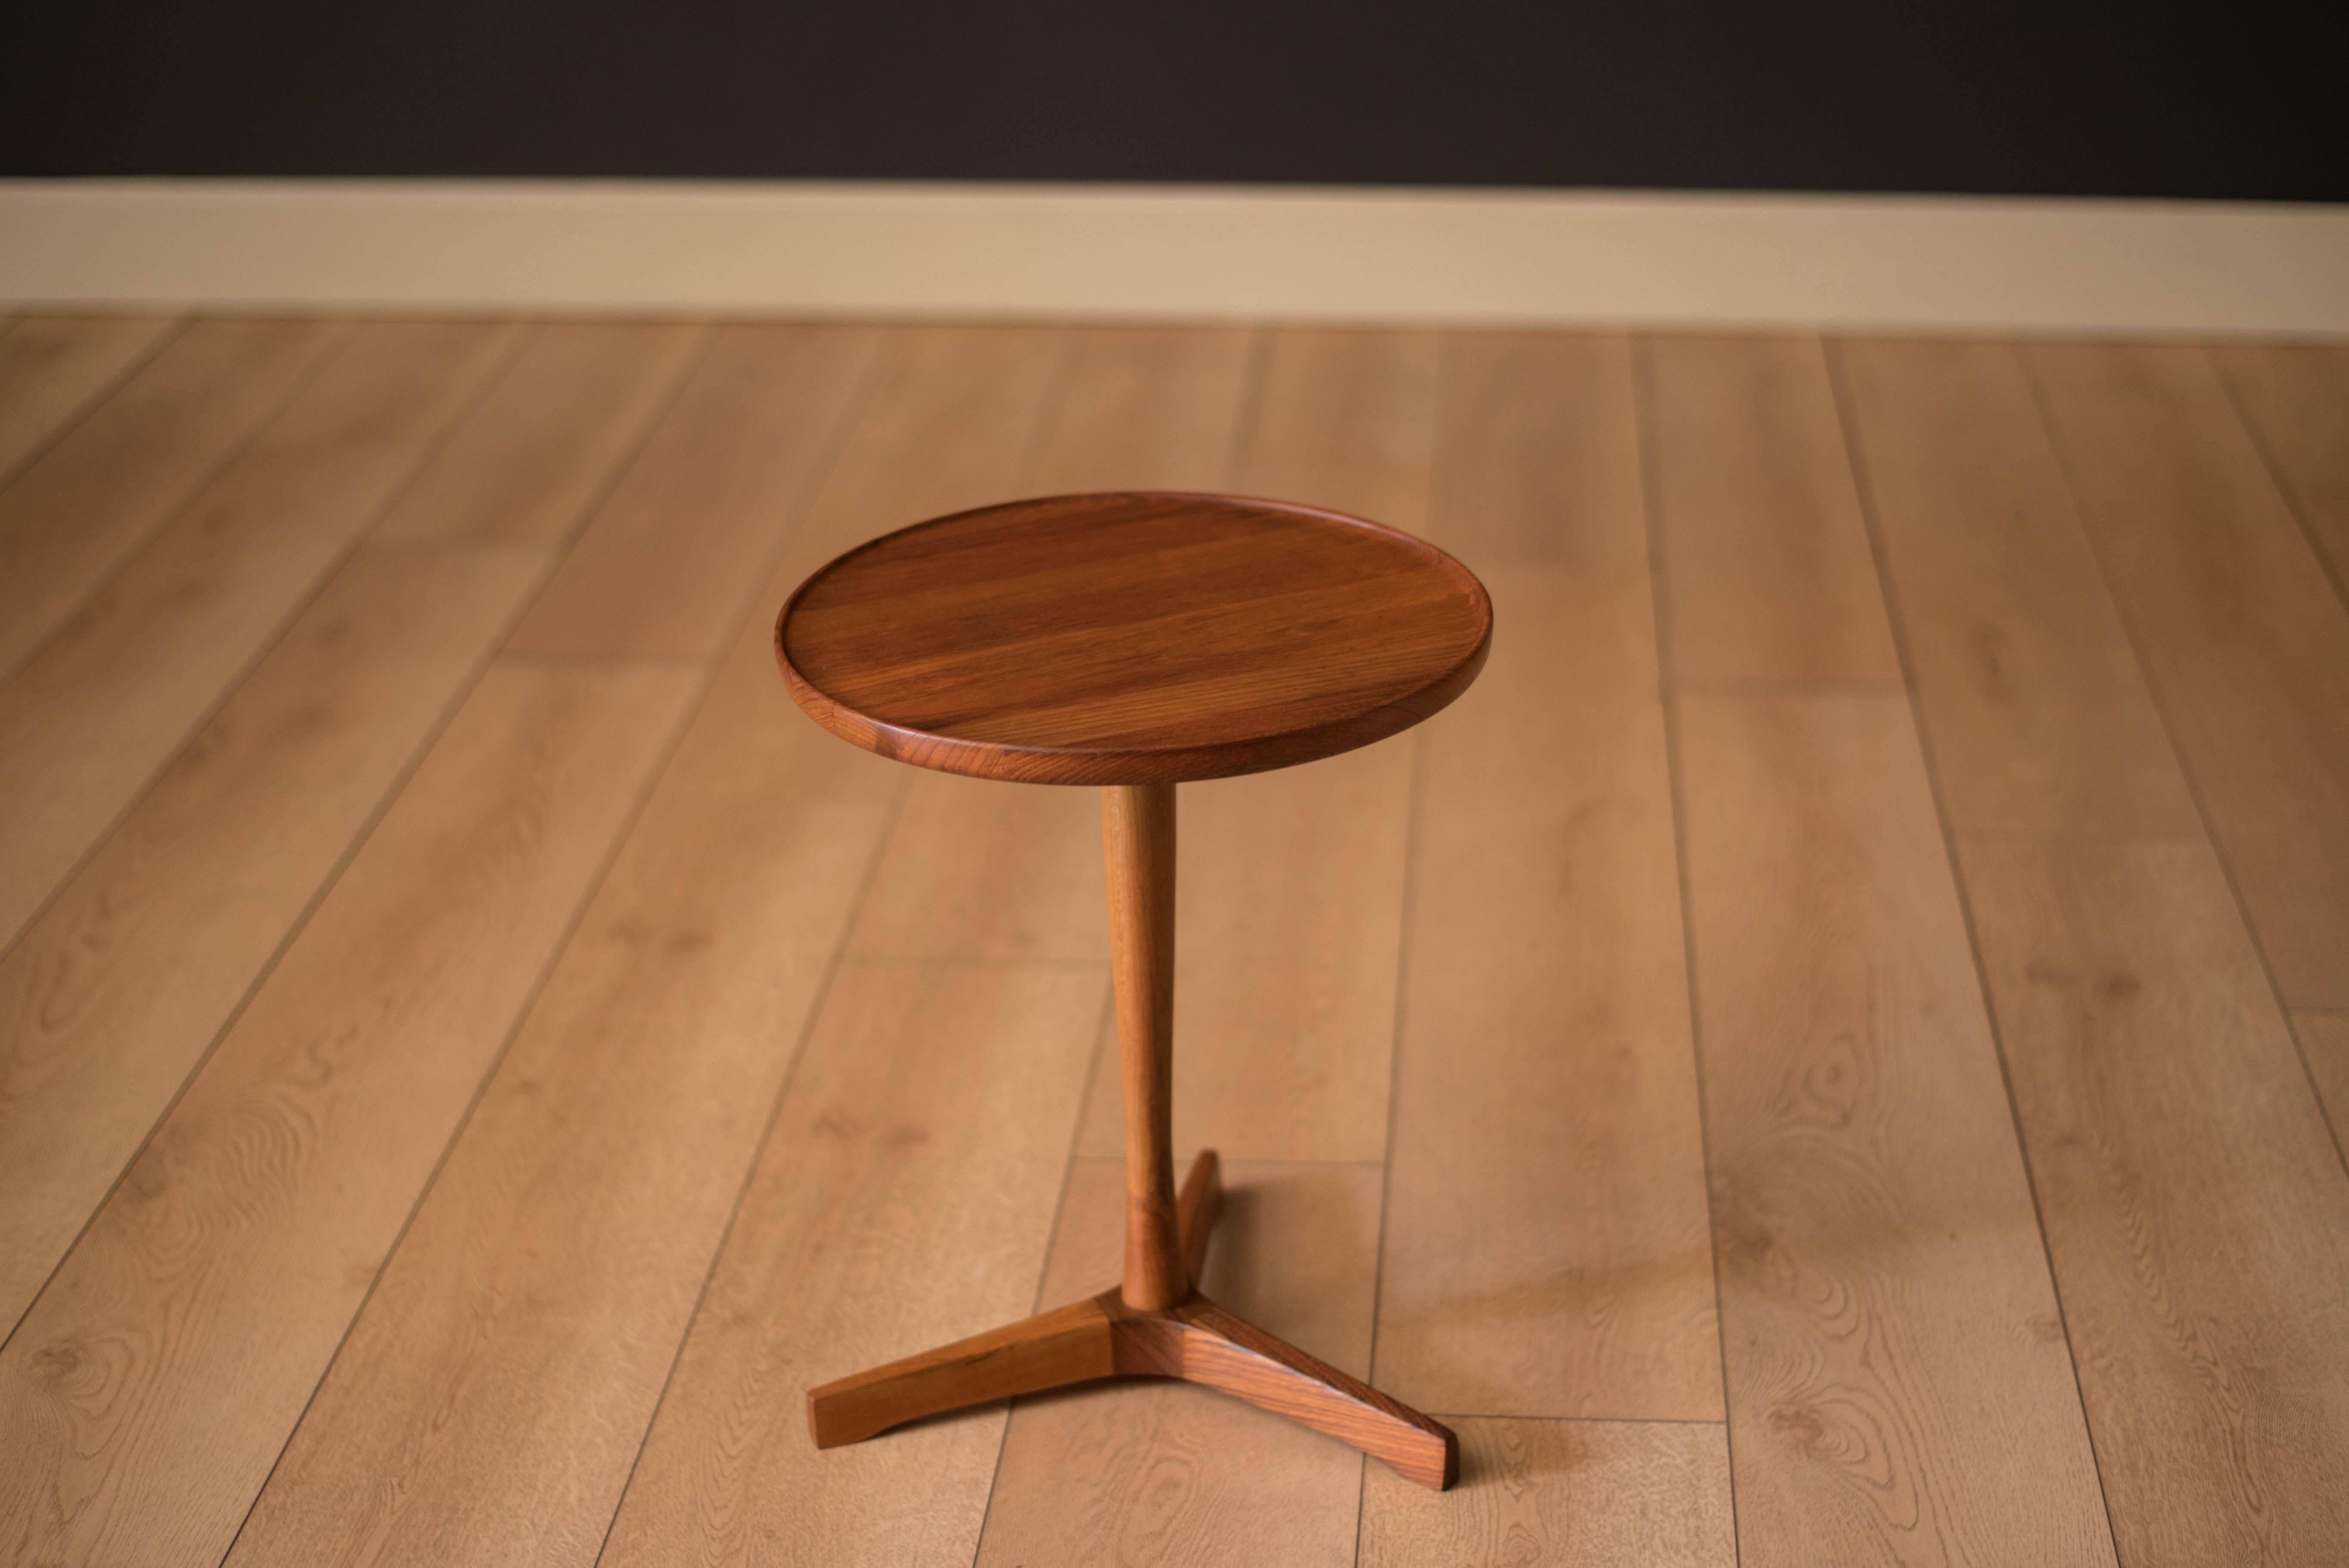 Mid century modern round side table designed by Hans C. Andersen for Artex, Denmark. Features a solid planked teak table top with a raised edge supported by a pedestal base.